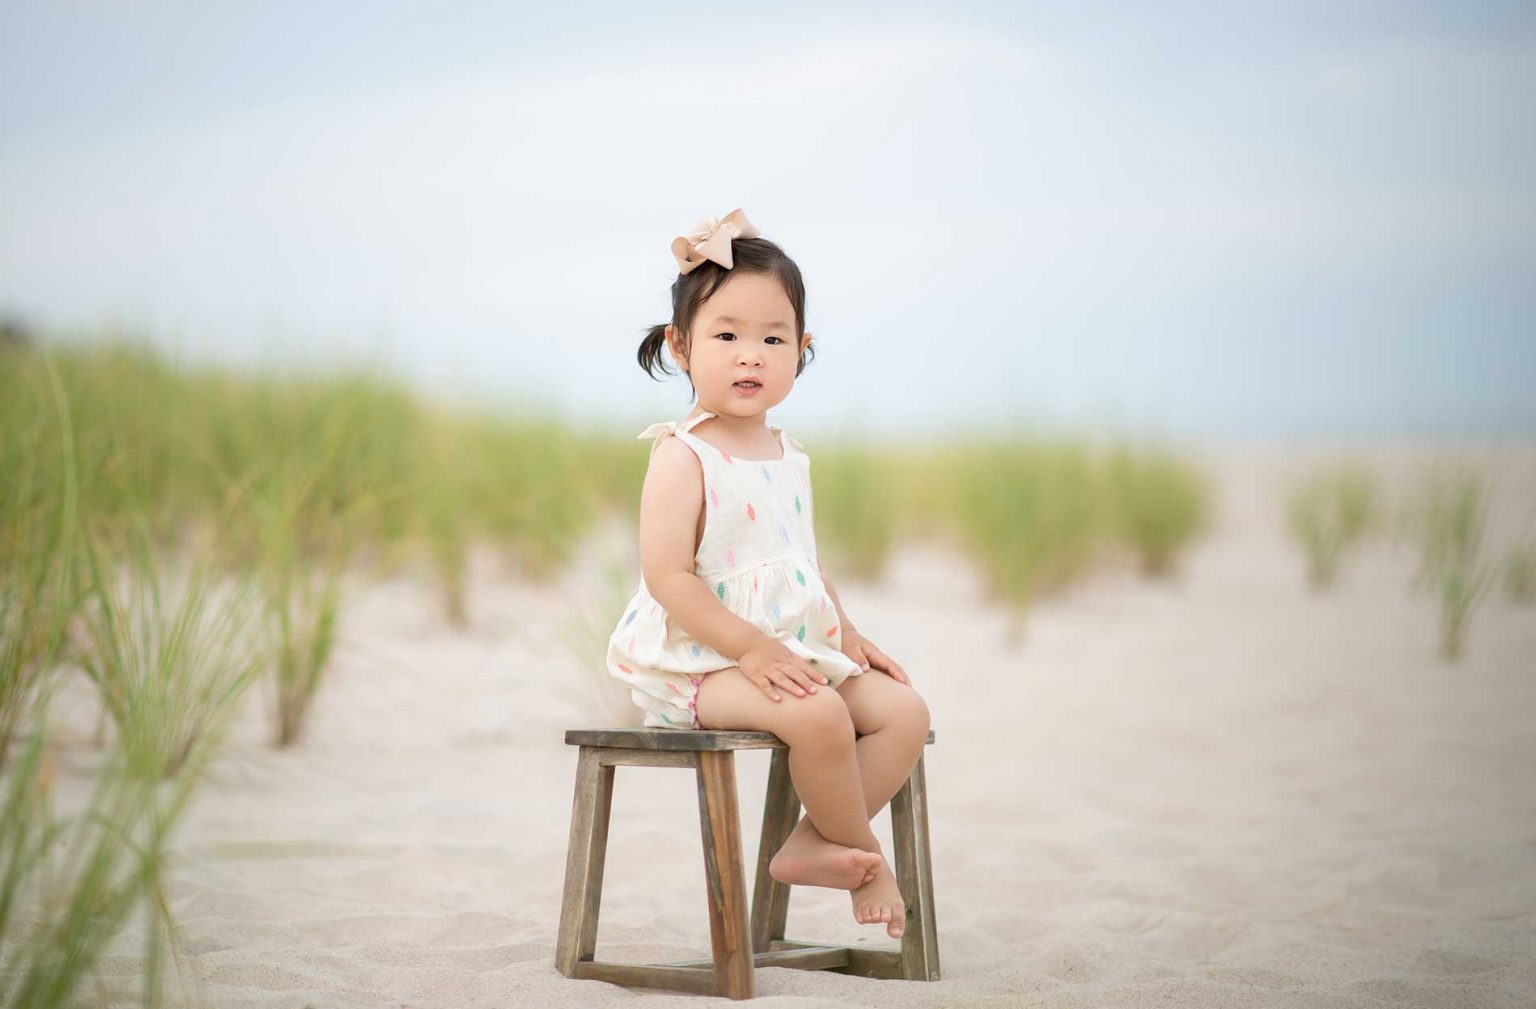 Toddler sitting on a sandy beach in East Hampton, NY